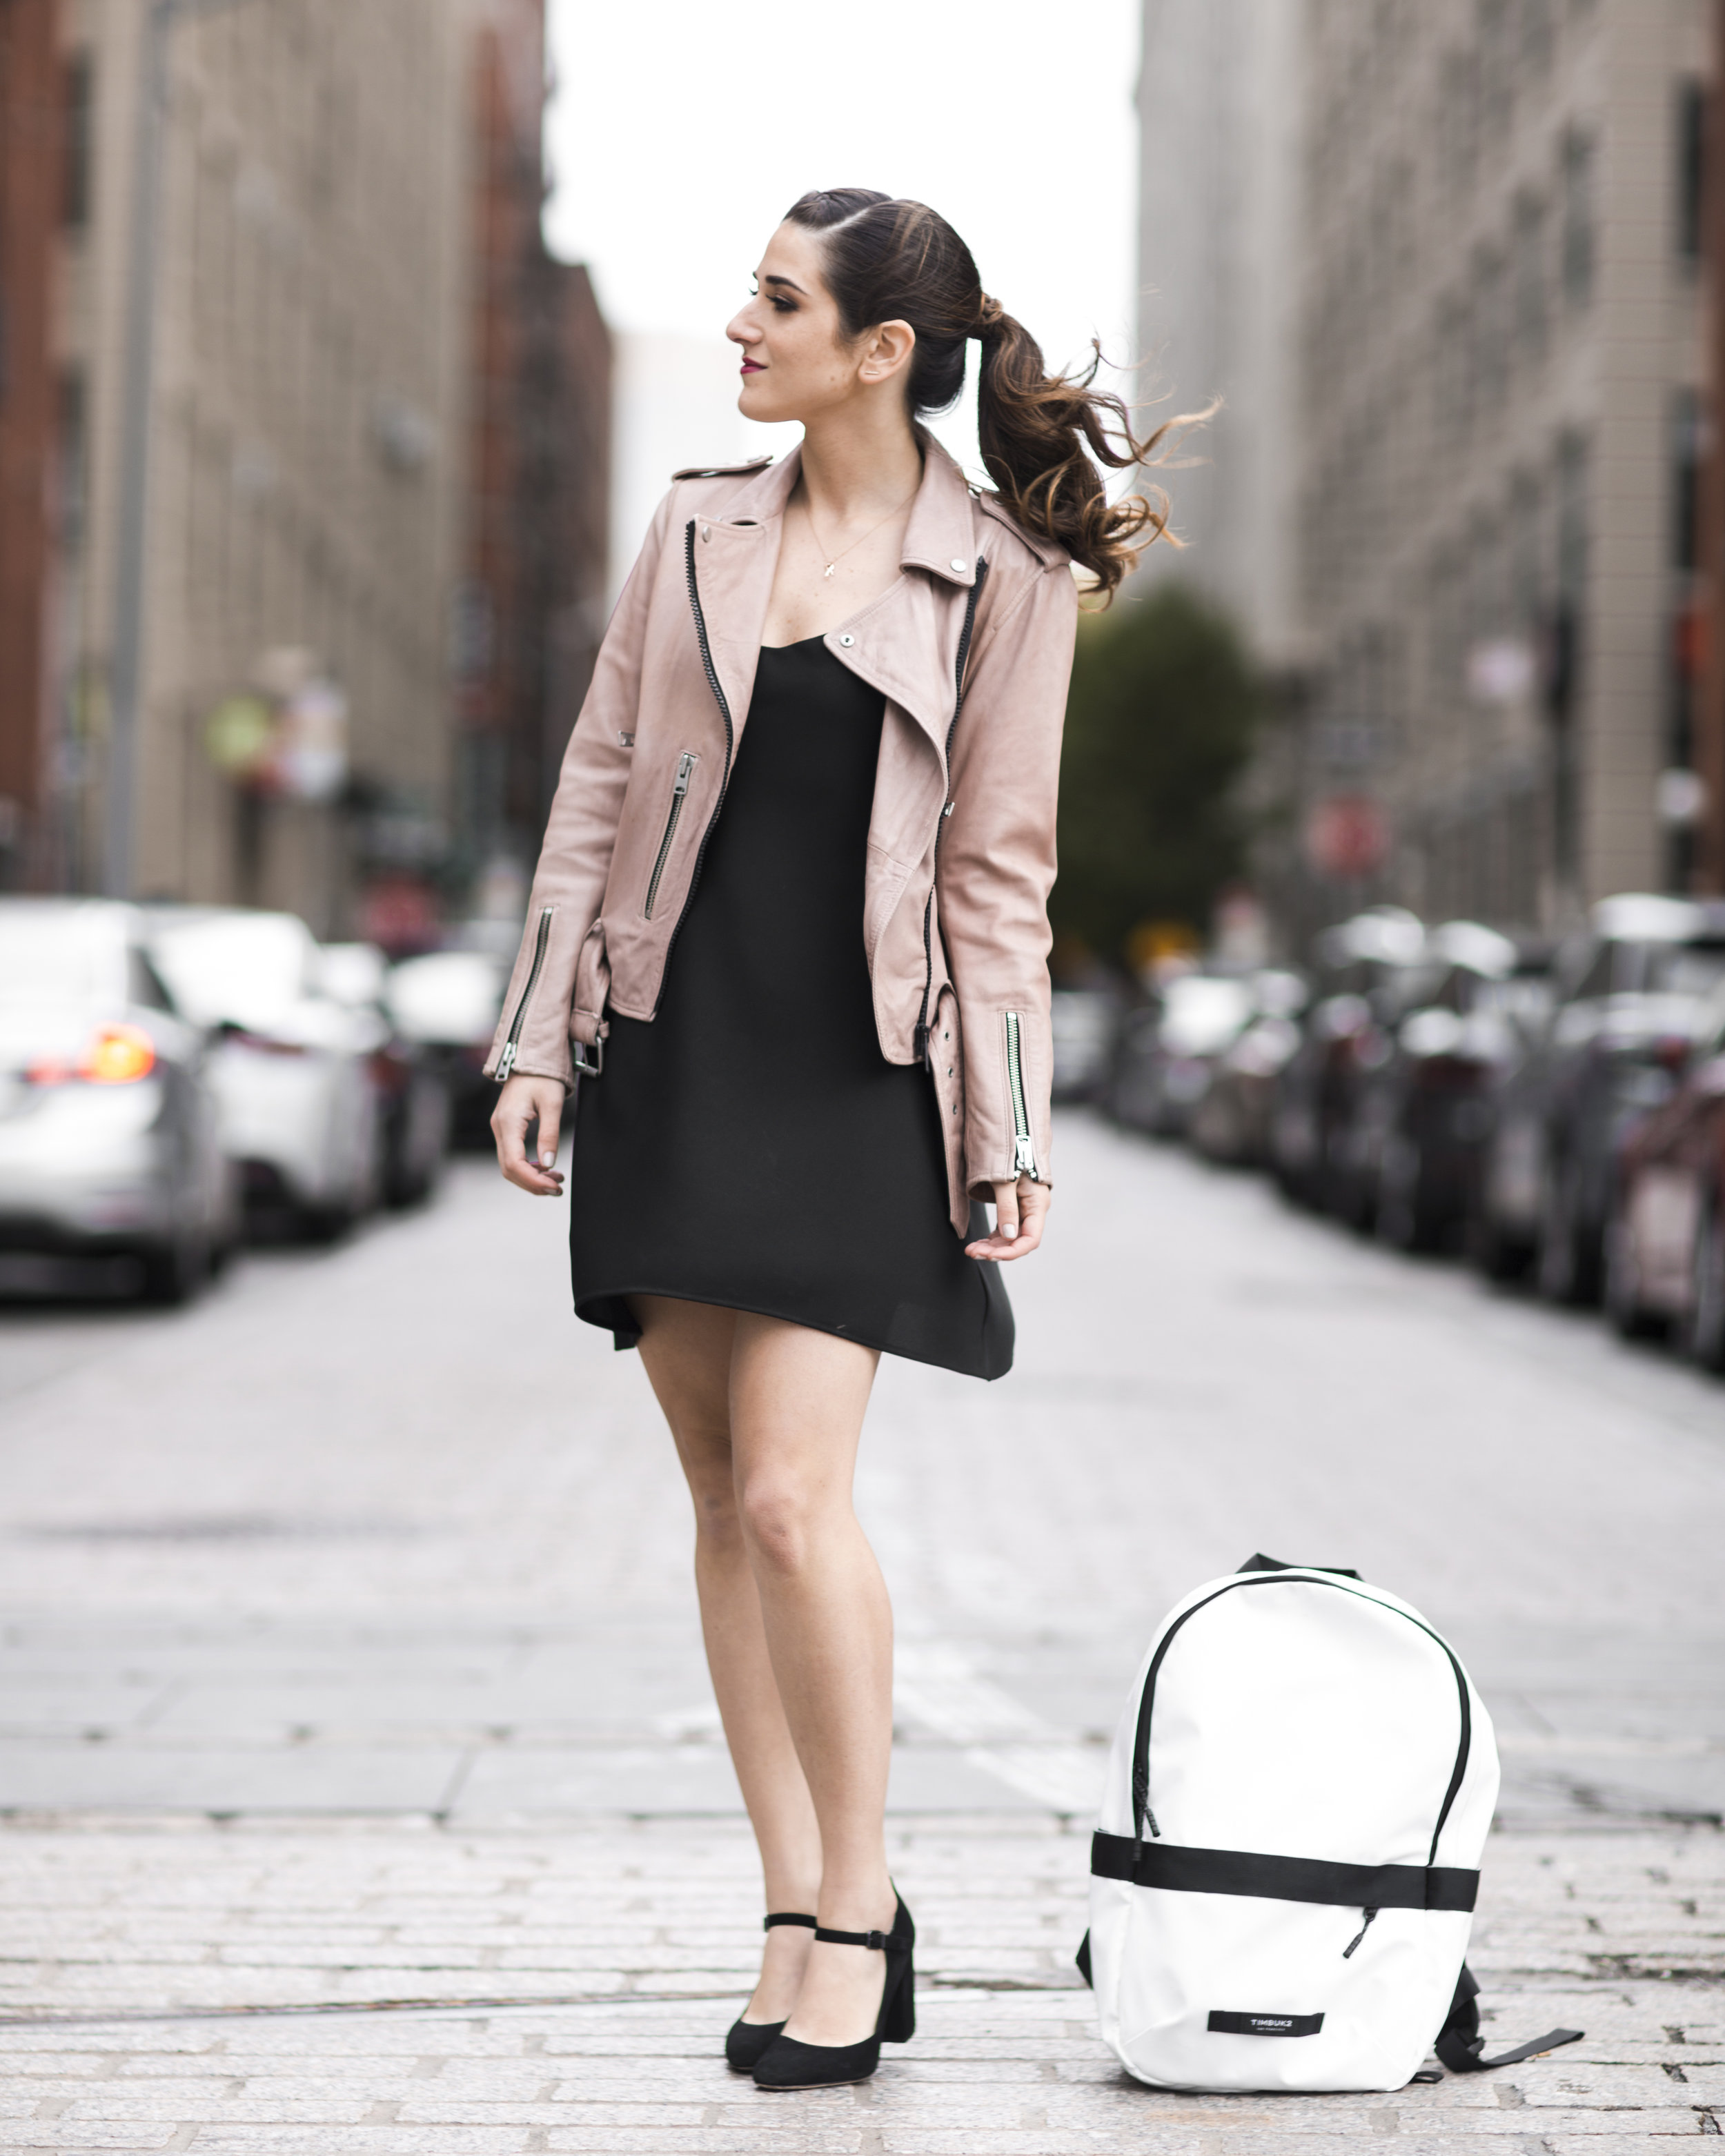 The Perfect Travel Backpack Timbuk2 Louboutins & Love Fashion Blog Esther Santer NYC Street Style Blogger Outfit OOTD Trendy All Saints Blush Pink Leather Backpack Black Pumps Shoes Heels Slip Dress Hair Braids Ponytail Women Girls Inspo Vacation Bag.jpg